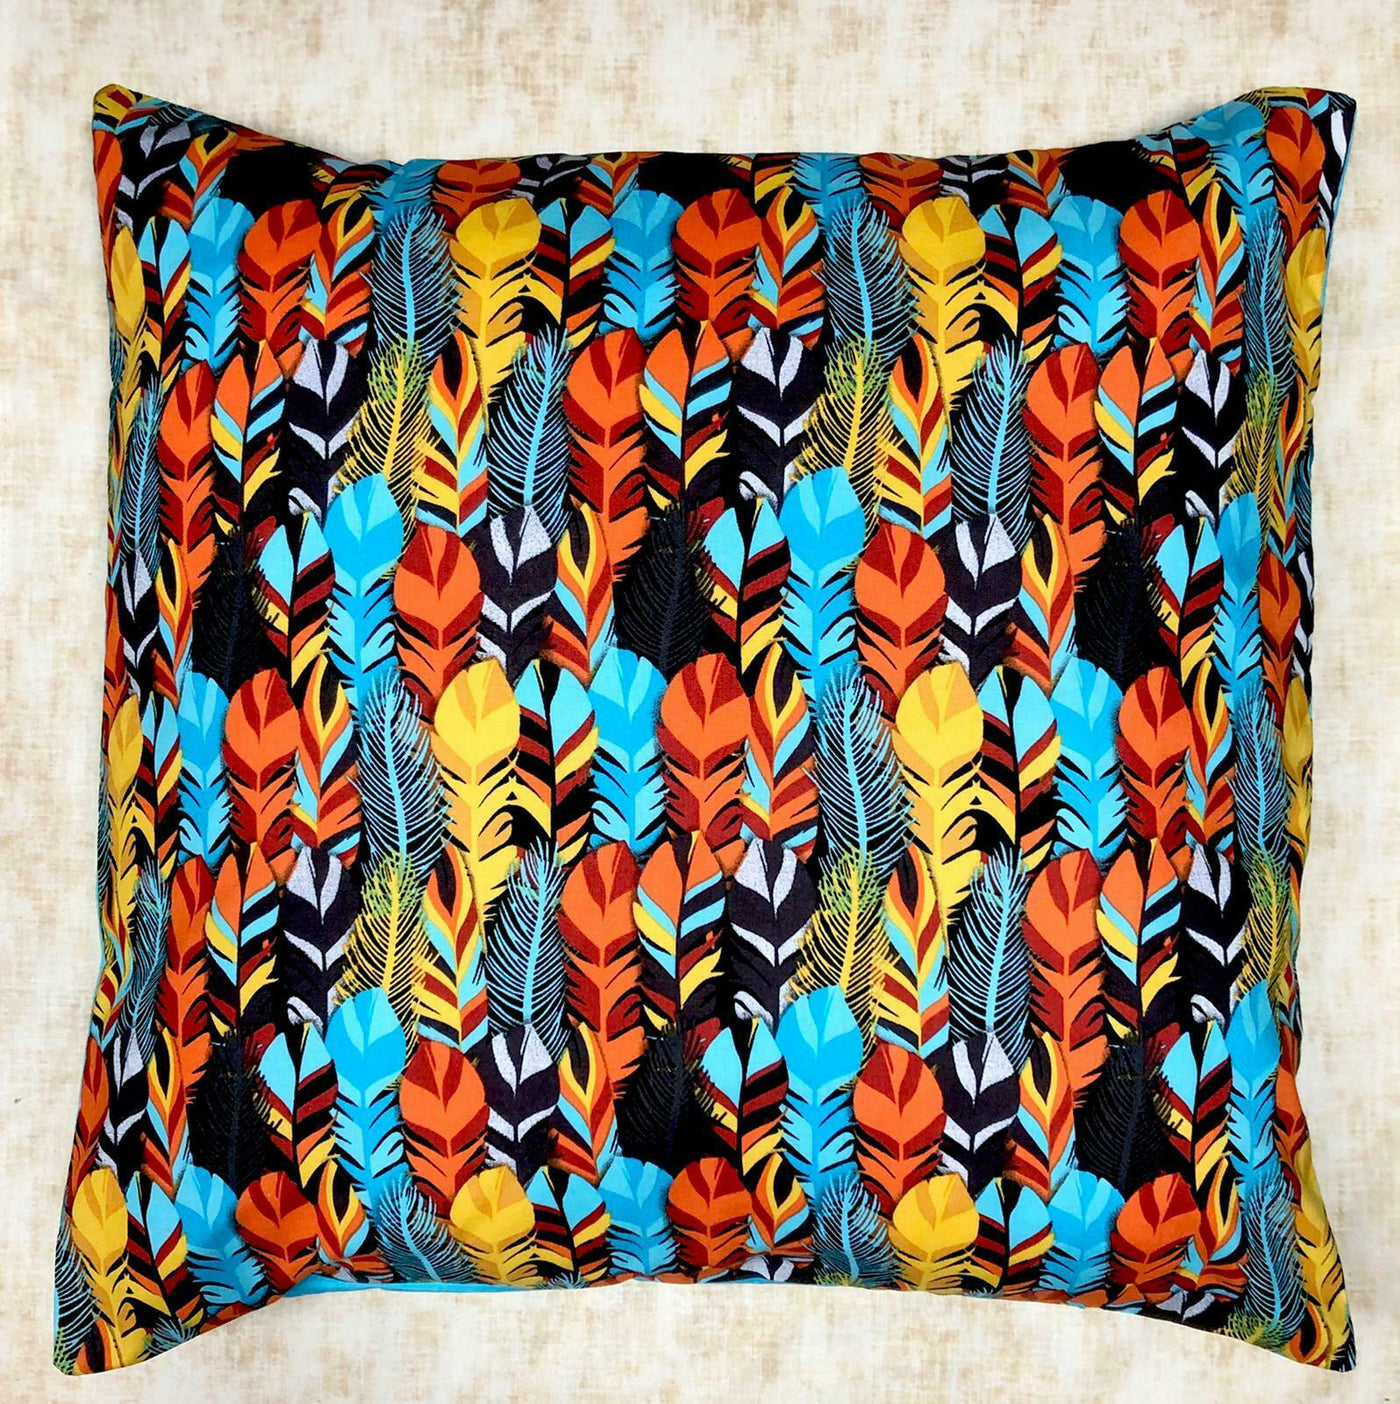 Feather Navajo Inca Inspired Cushion Cover Decorative Case fits 18" x 18" Cotton